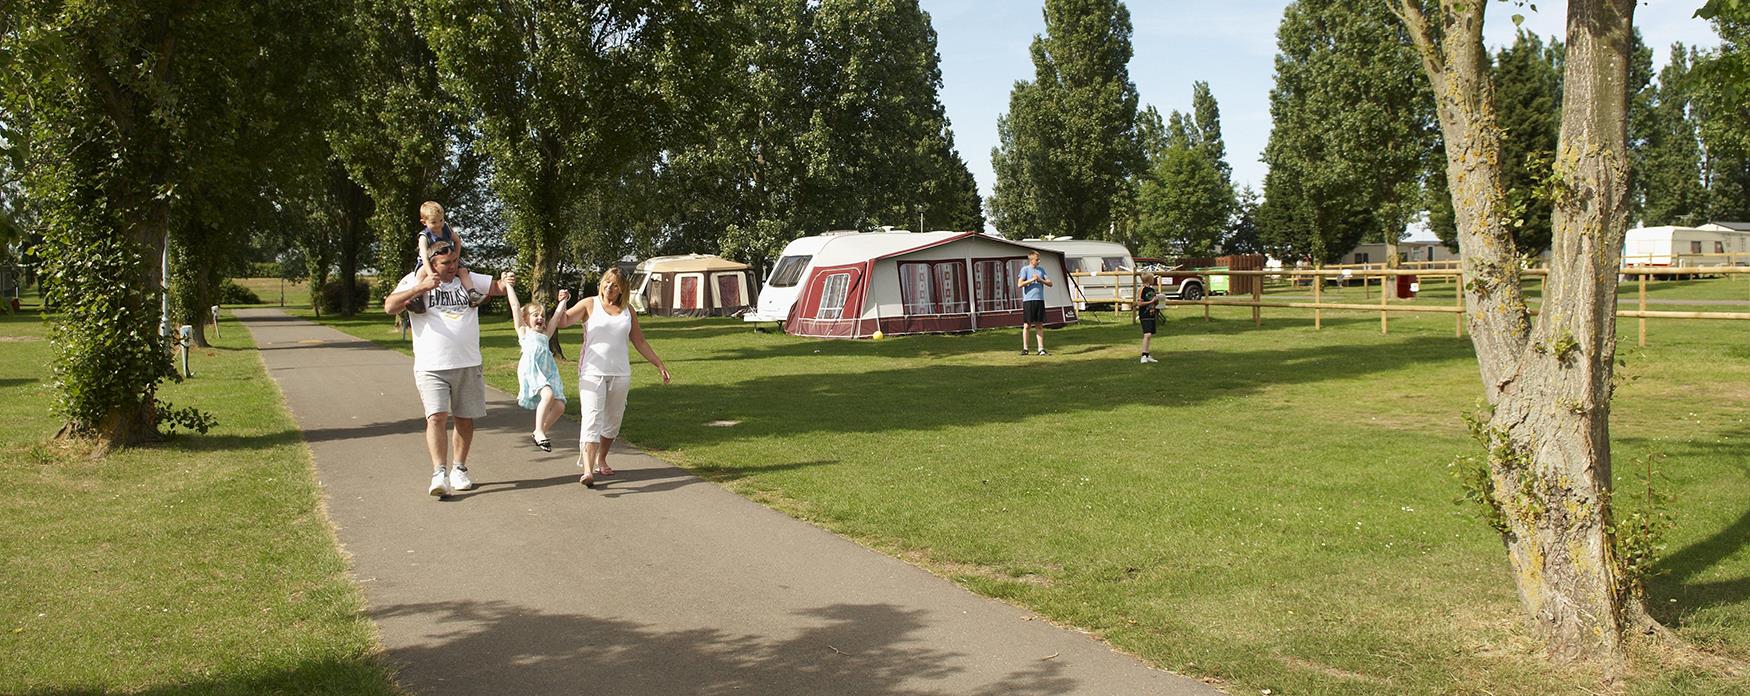 Image of holiday park caravans